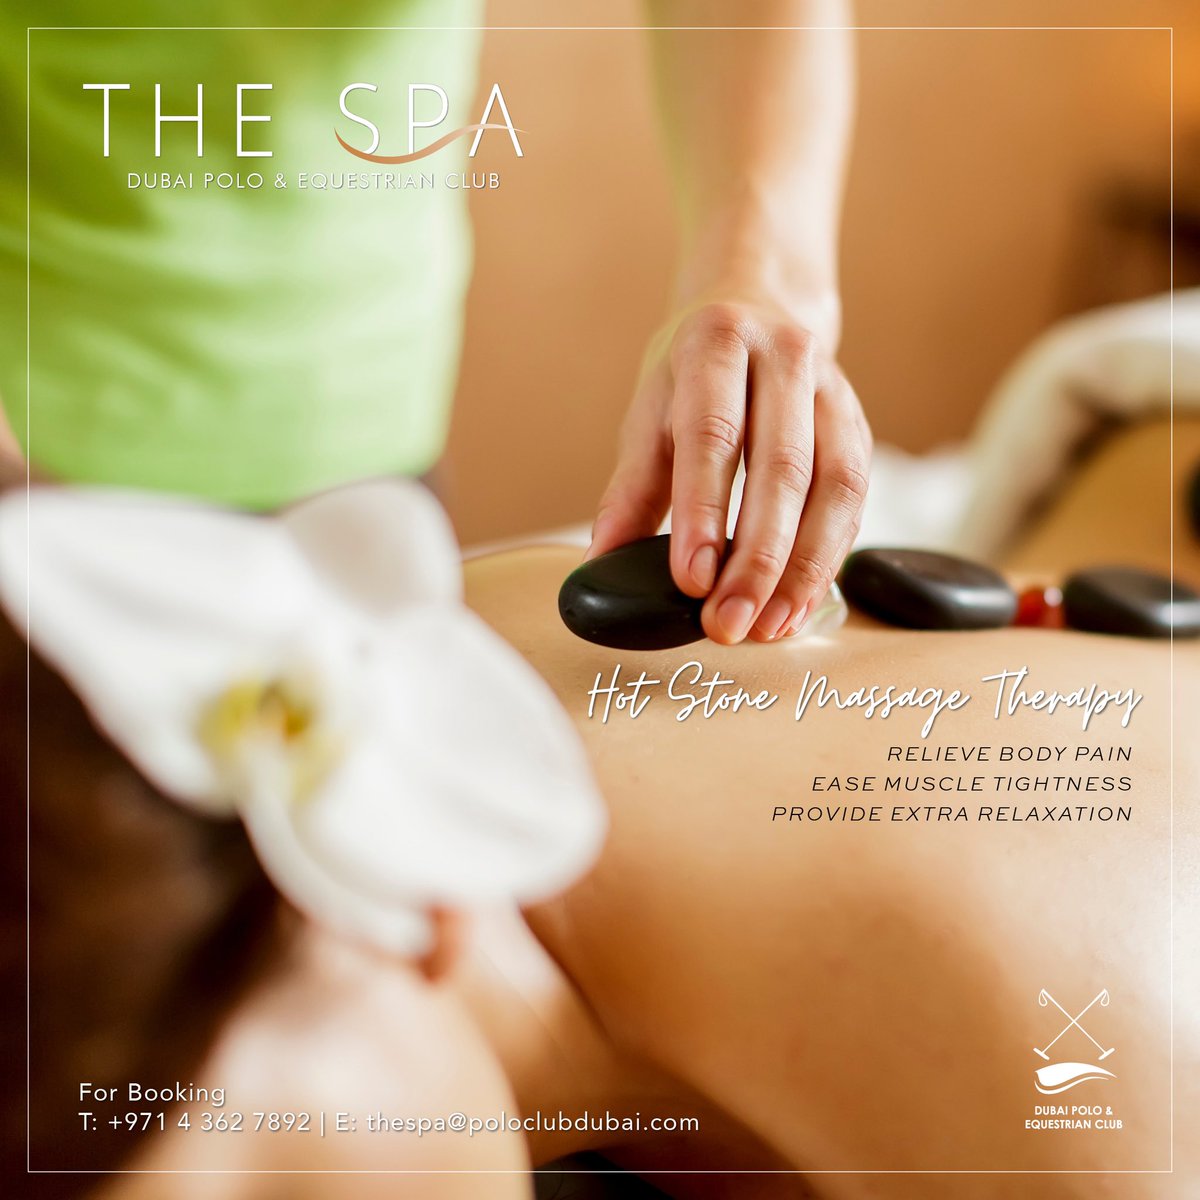 Plan for a rejuvenating weekend and choose Hot Stone Massage Therapy at The Spa. While all types of massage can help relieve pain caused by tense muscles, this is unique since it may provide greater relief if muscles are extremely tight. For bookings, contact +971 4 3627892